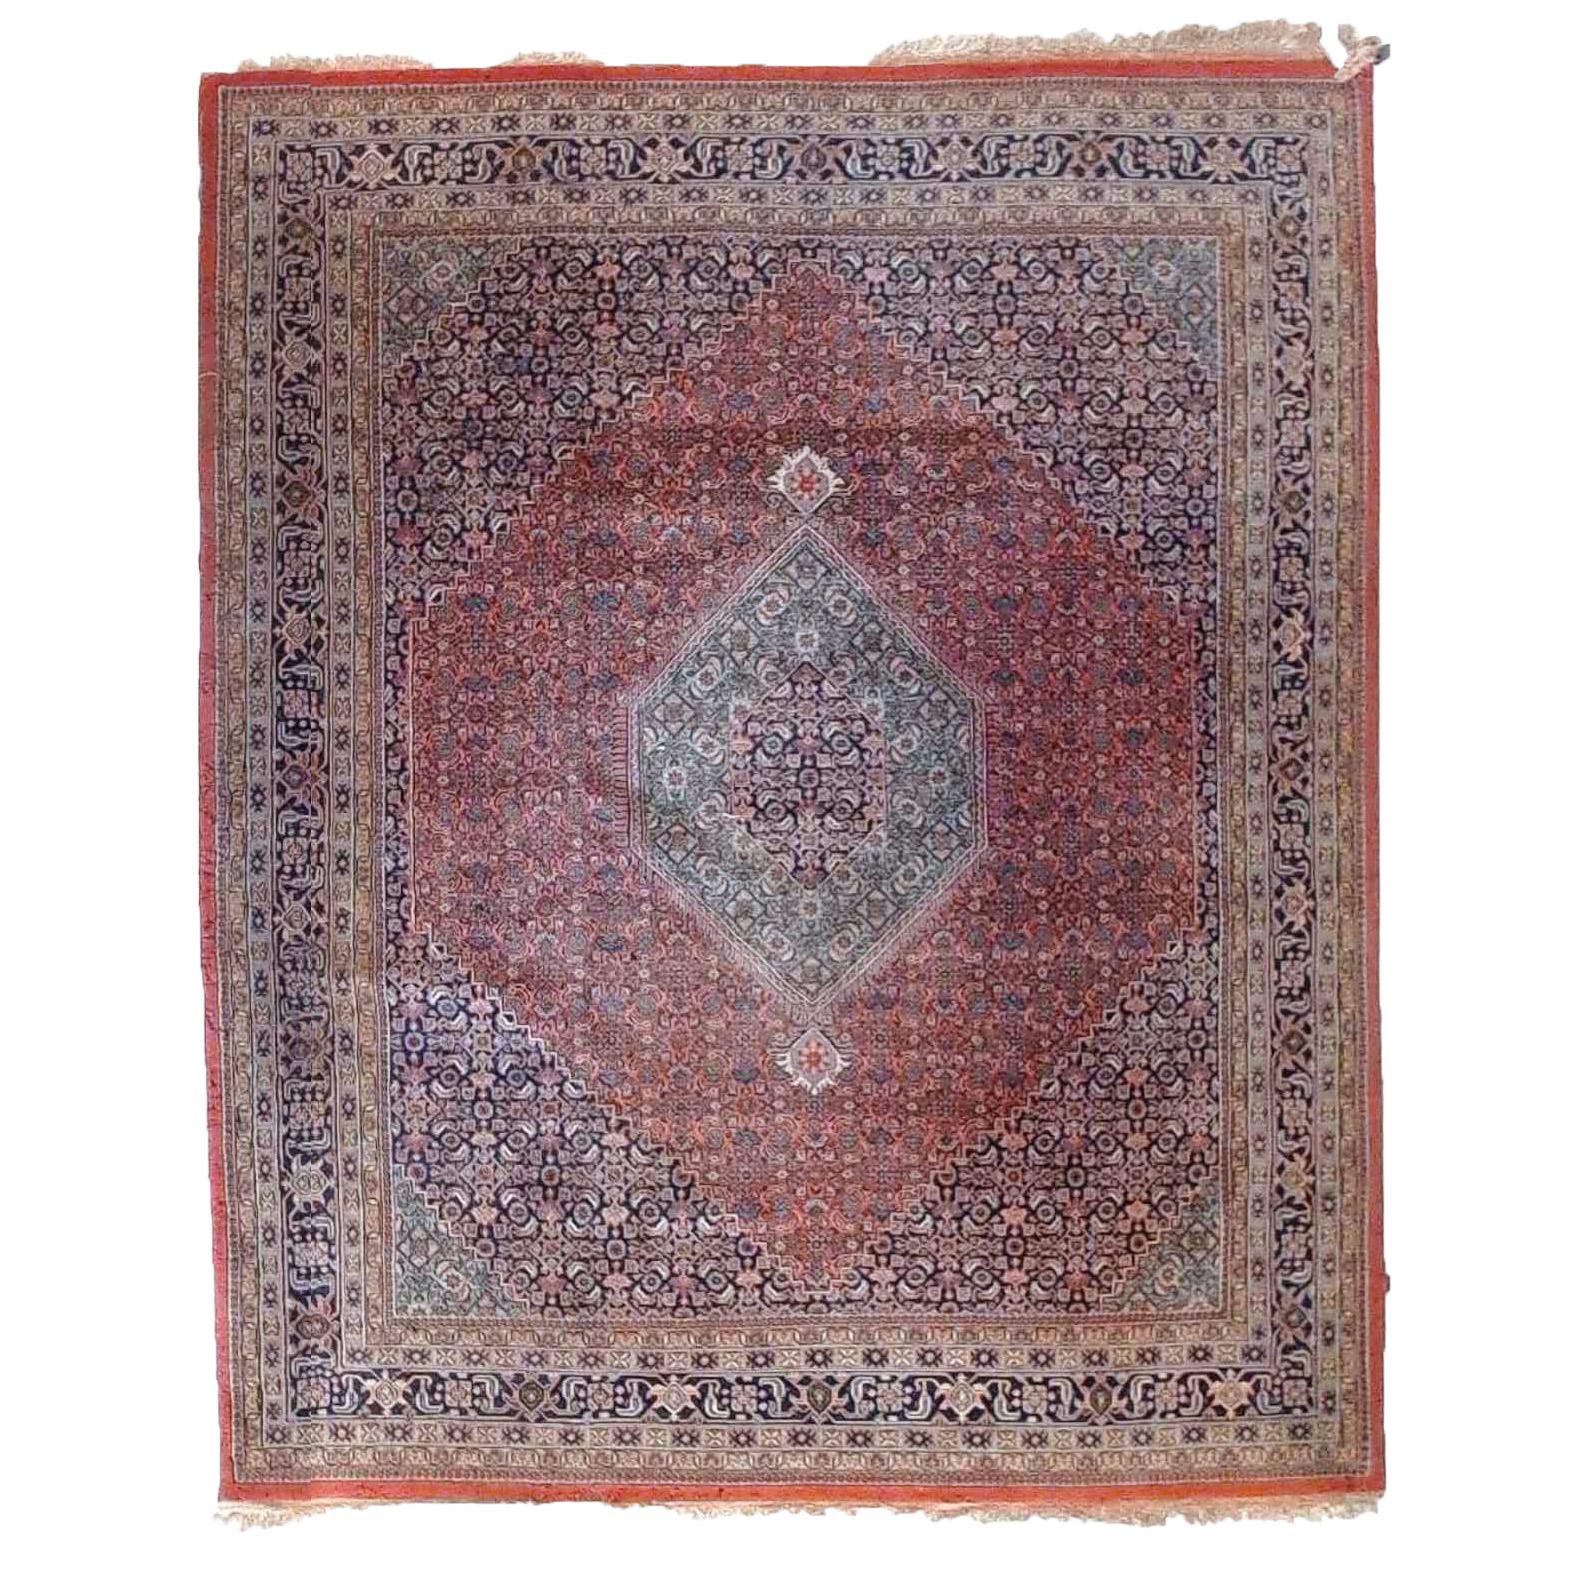 An antique Mir Persian oriental rug offers wool construction with central medallion, circa 1930

Measures - 124